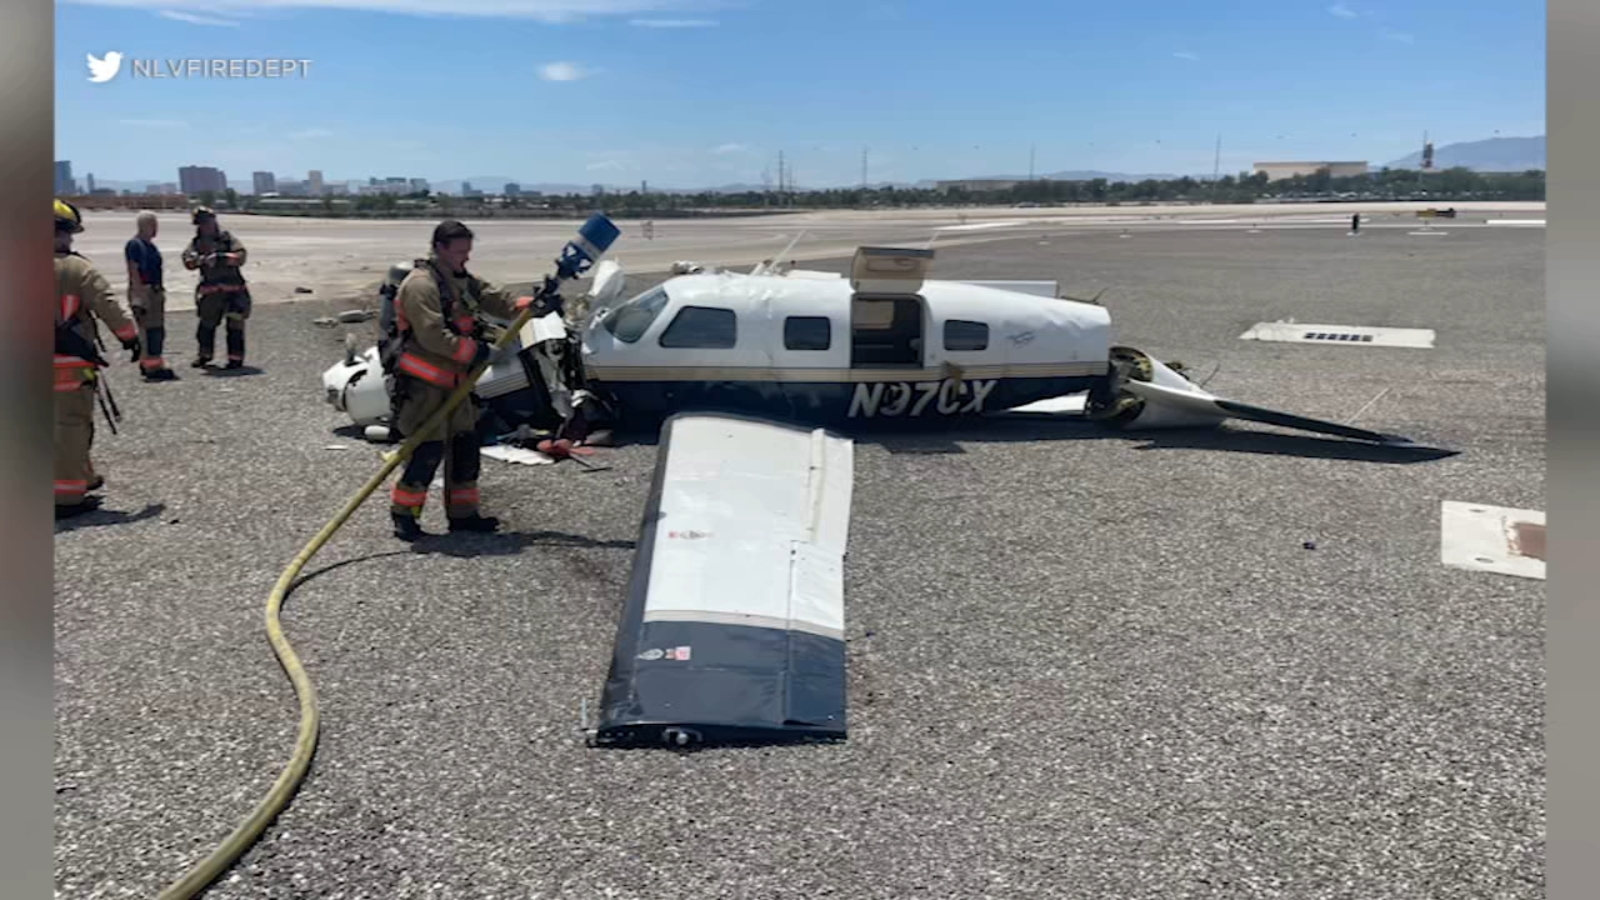 4 people killed when 2 small planes collide midair at North Las Vegas